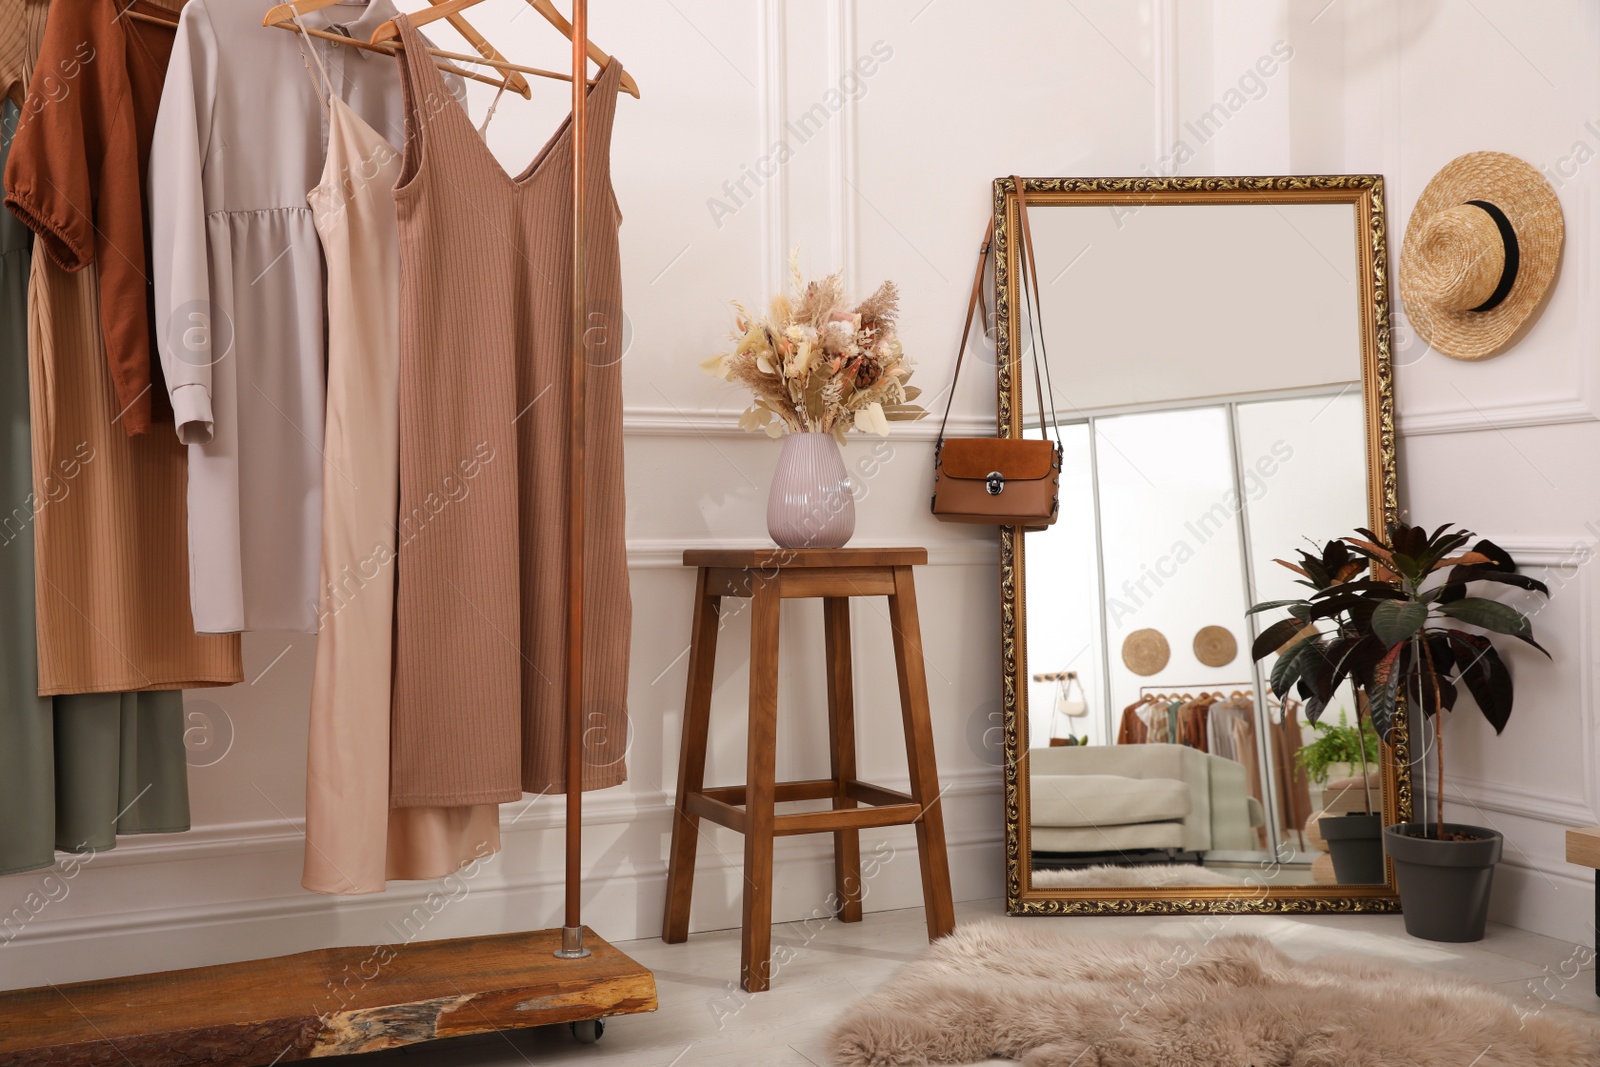 Photo of Dressing room interior with large mirror and stylish clothes